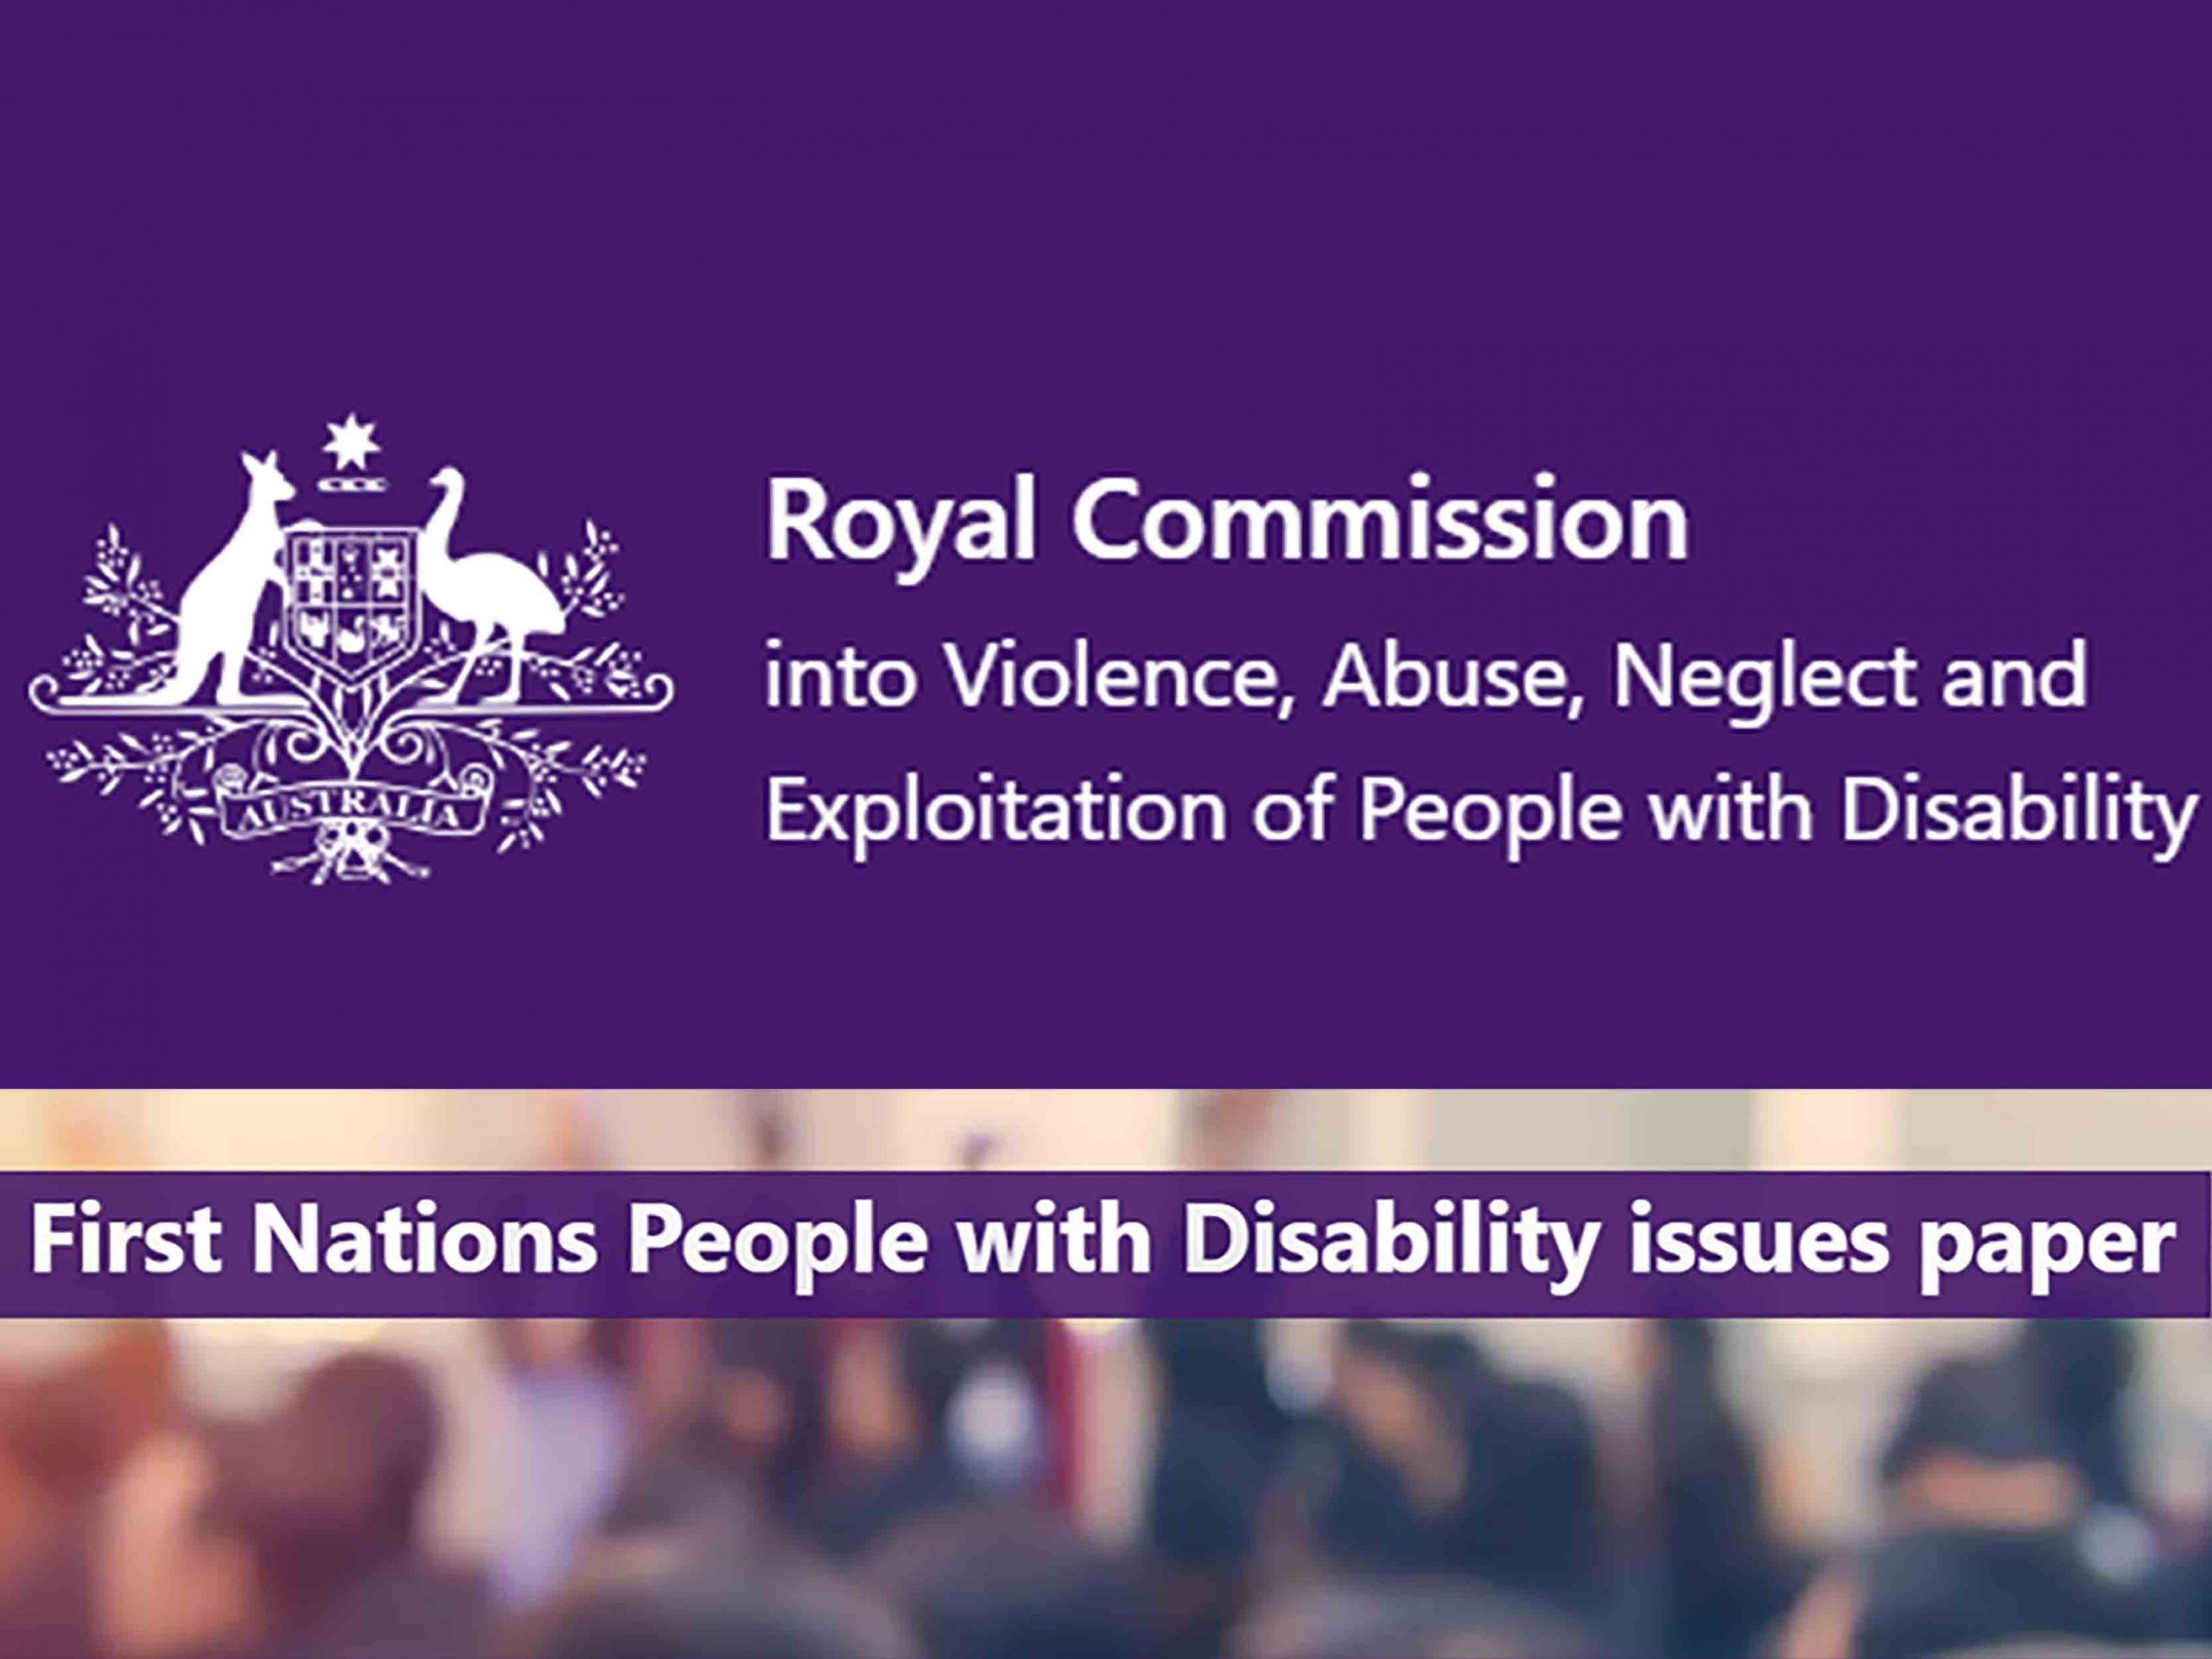 Image with purple background and Australian Federal Government Logo. Text reads Royal Commission into Violence Abuse Neglect and Exploitation of People with Disability. Second part of image is of a crowd of people with text reading First Nations People With Disability issues paper.